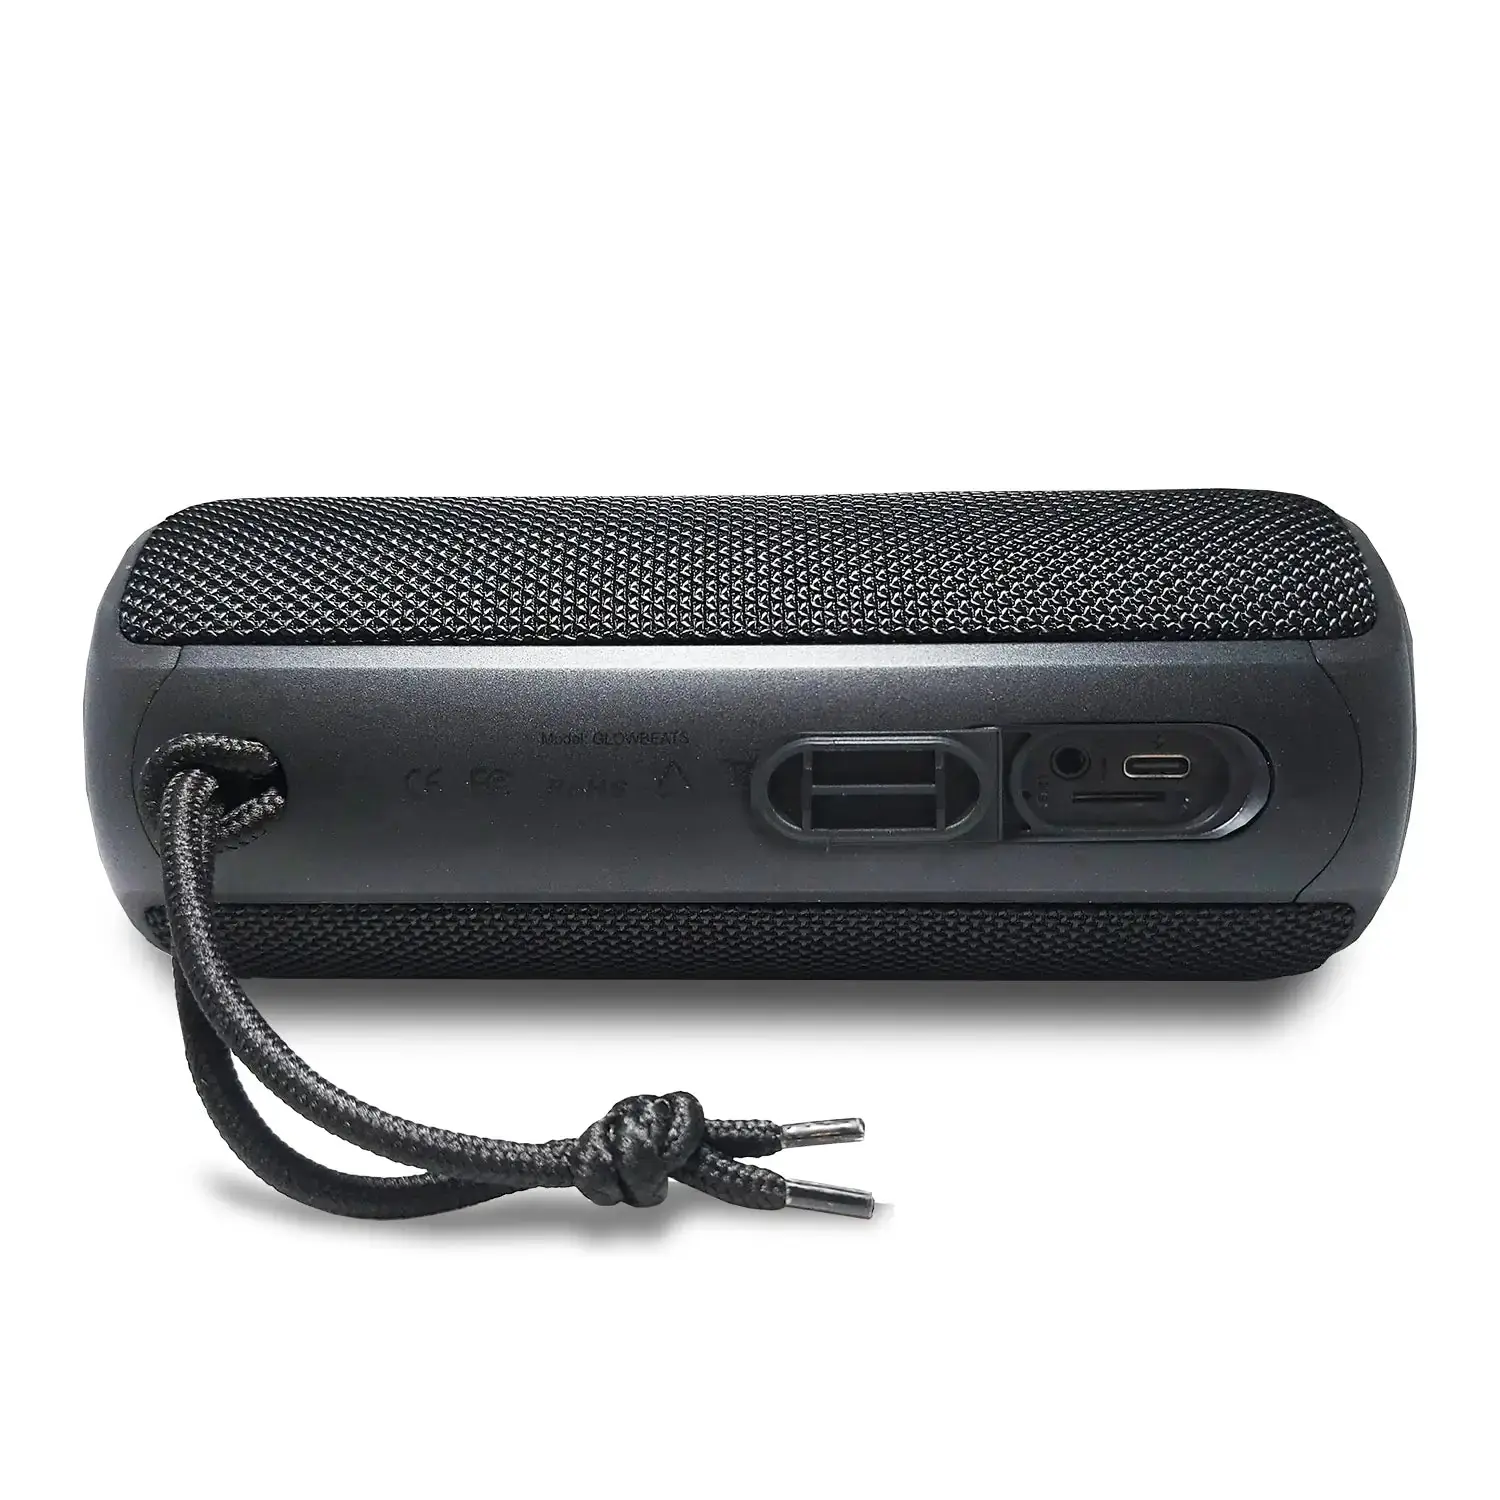 GLOWBEATS Wireless Bluetooth Speaker, Black, Side Angle, Showing accessible USB-C port, SD Card Slot, and AUX Cable Connection.